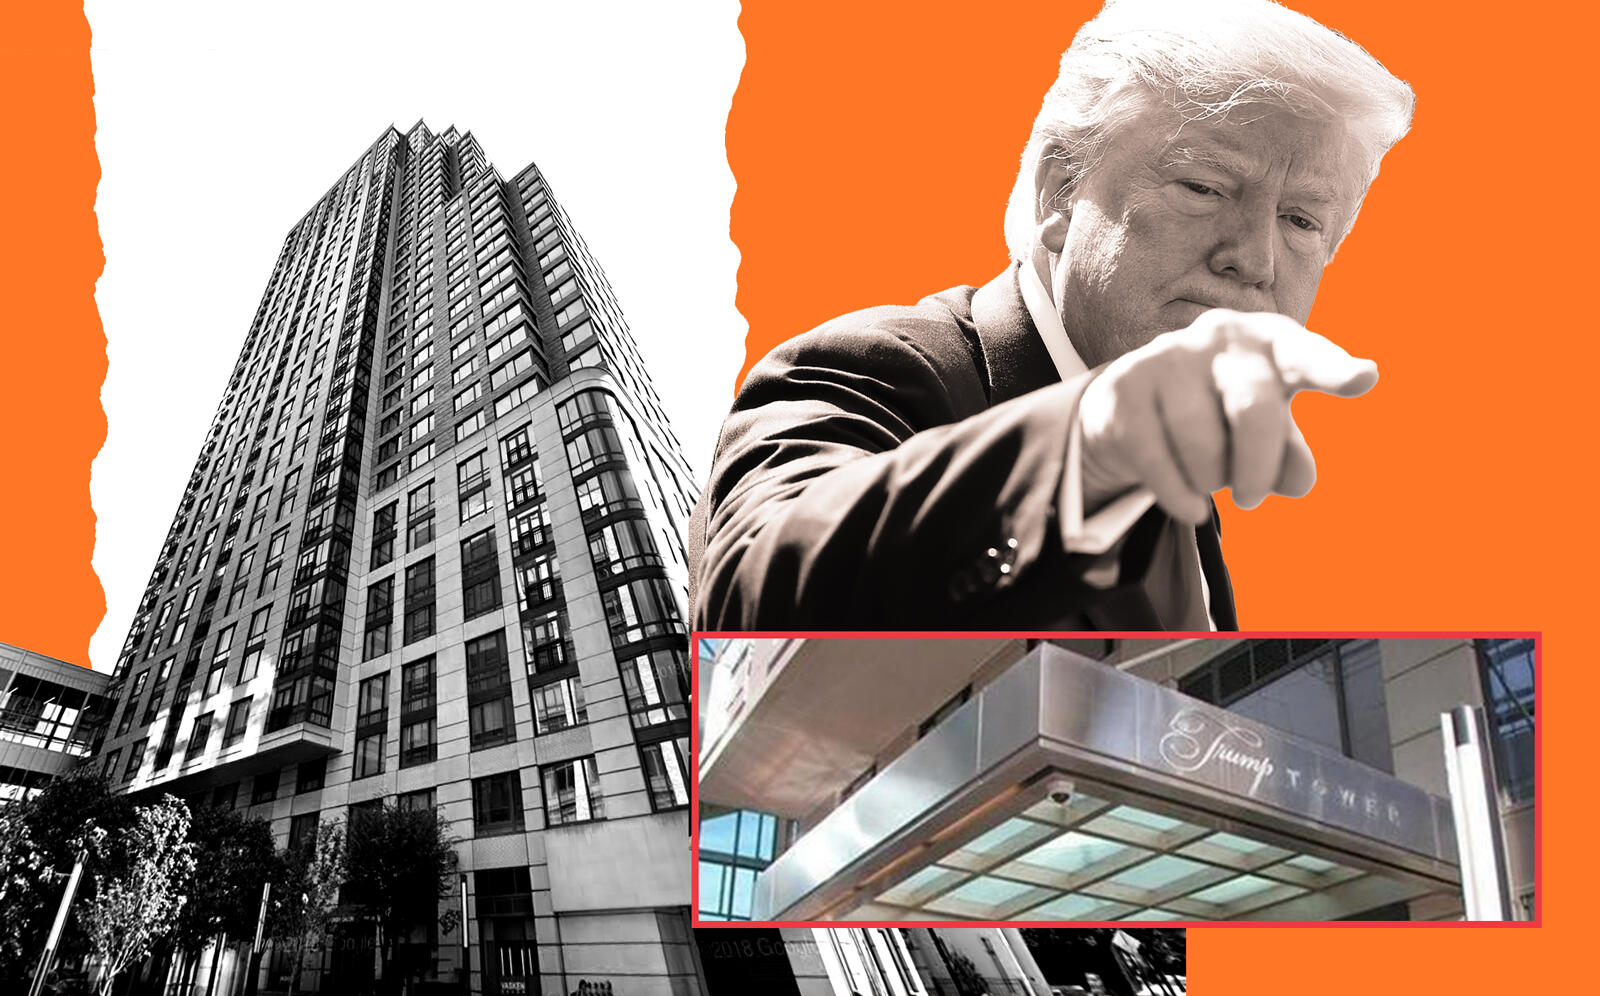 10 City Place in White Plains and Donald Trump (Getty, Google Maps)